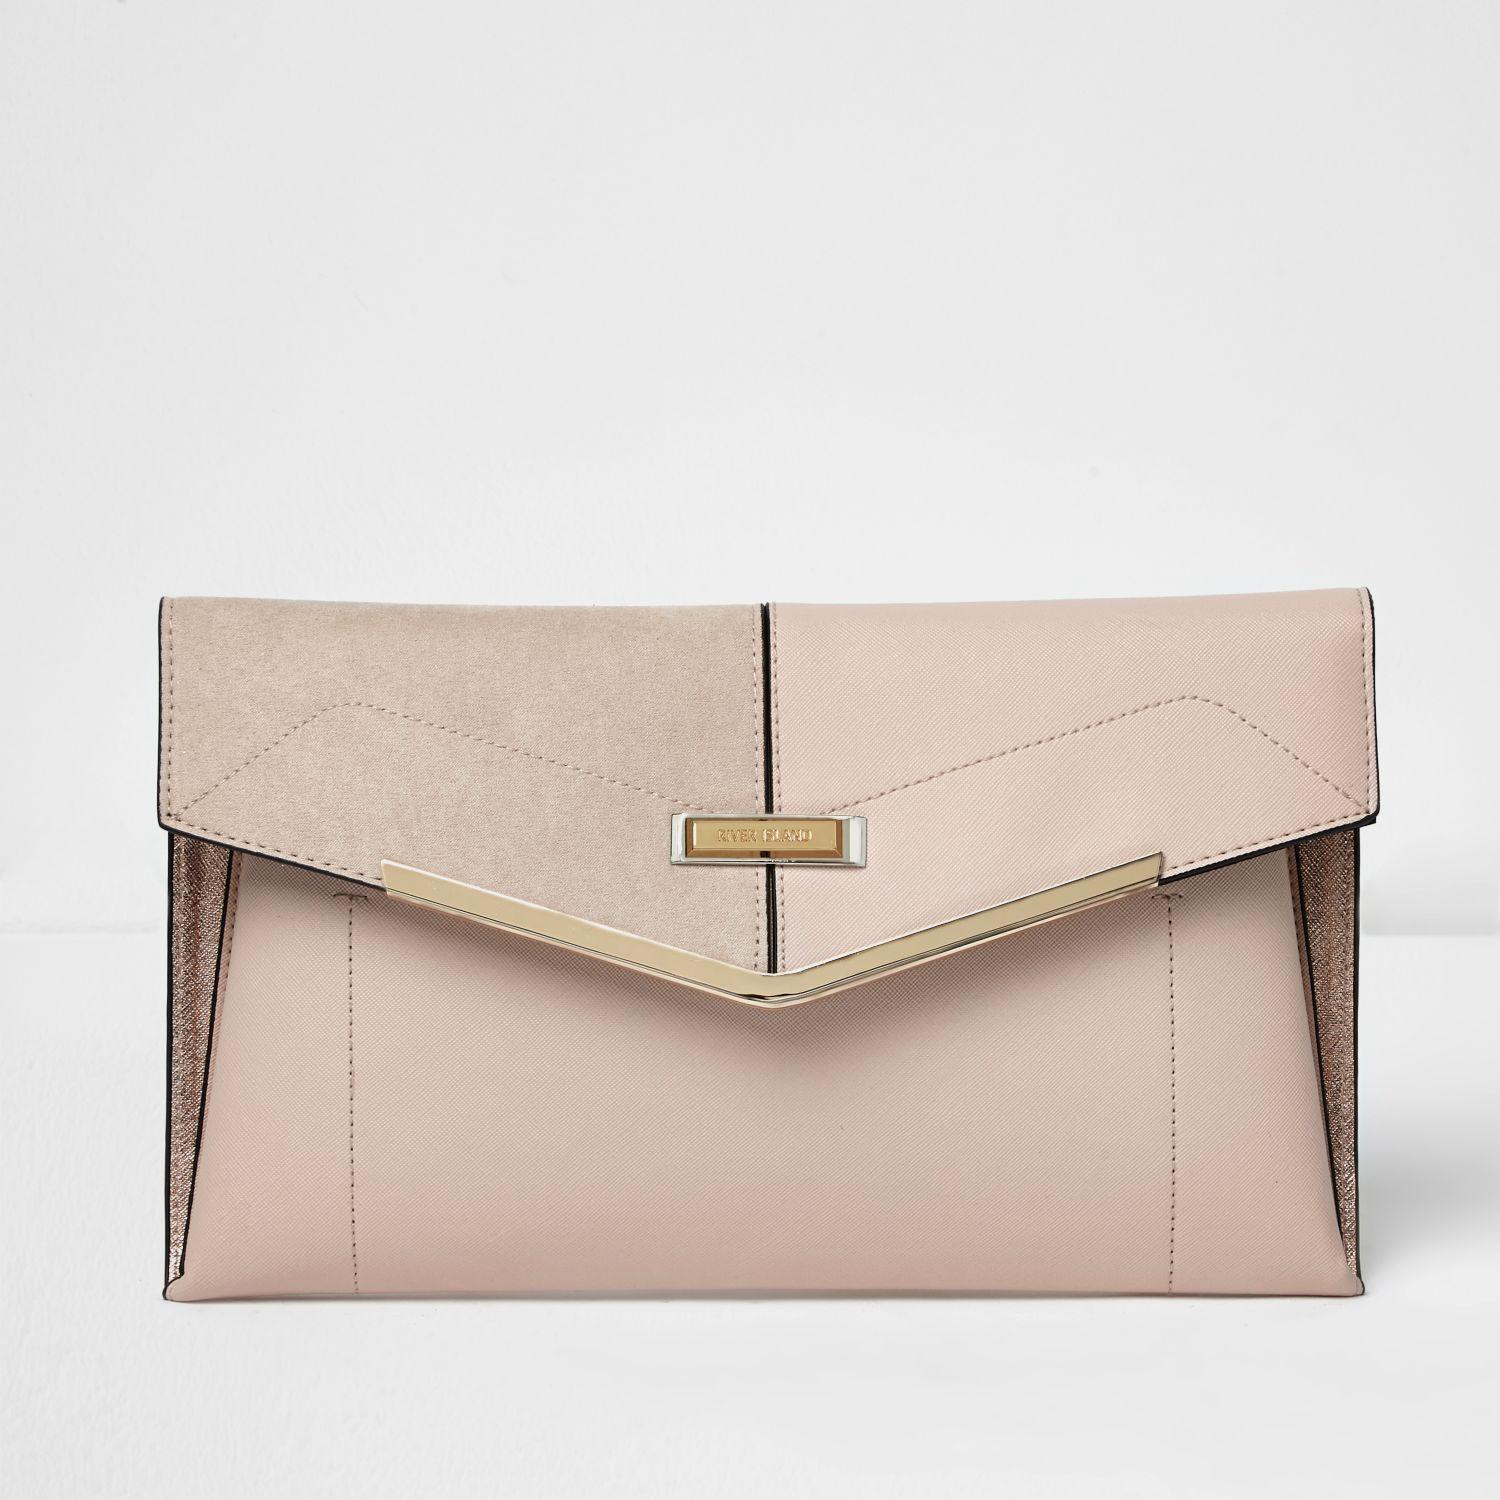 River Island Nude Envelope Clutch Bag in Natural | Lyst